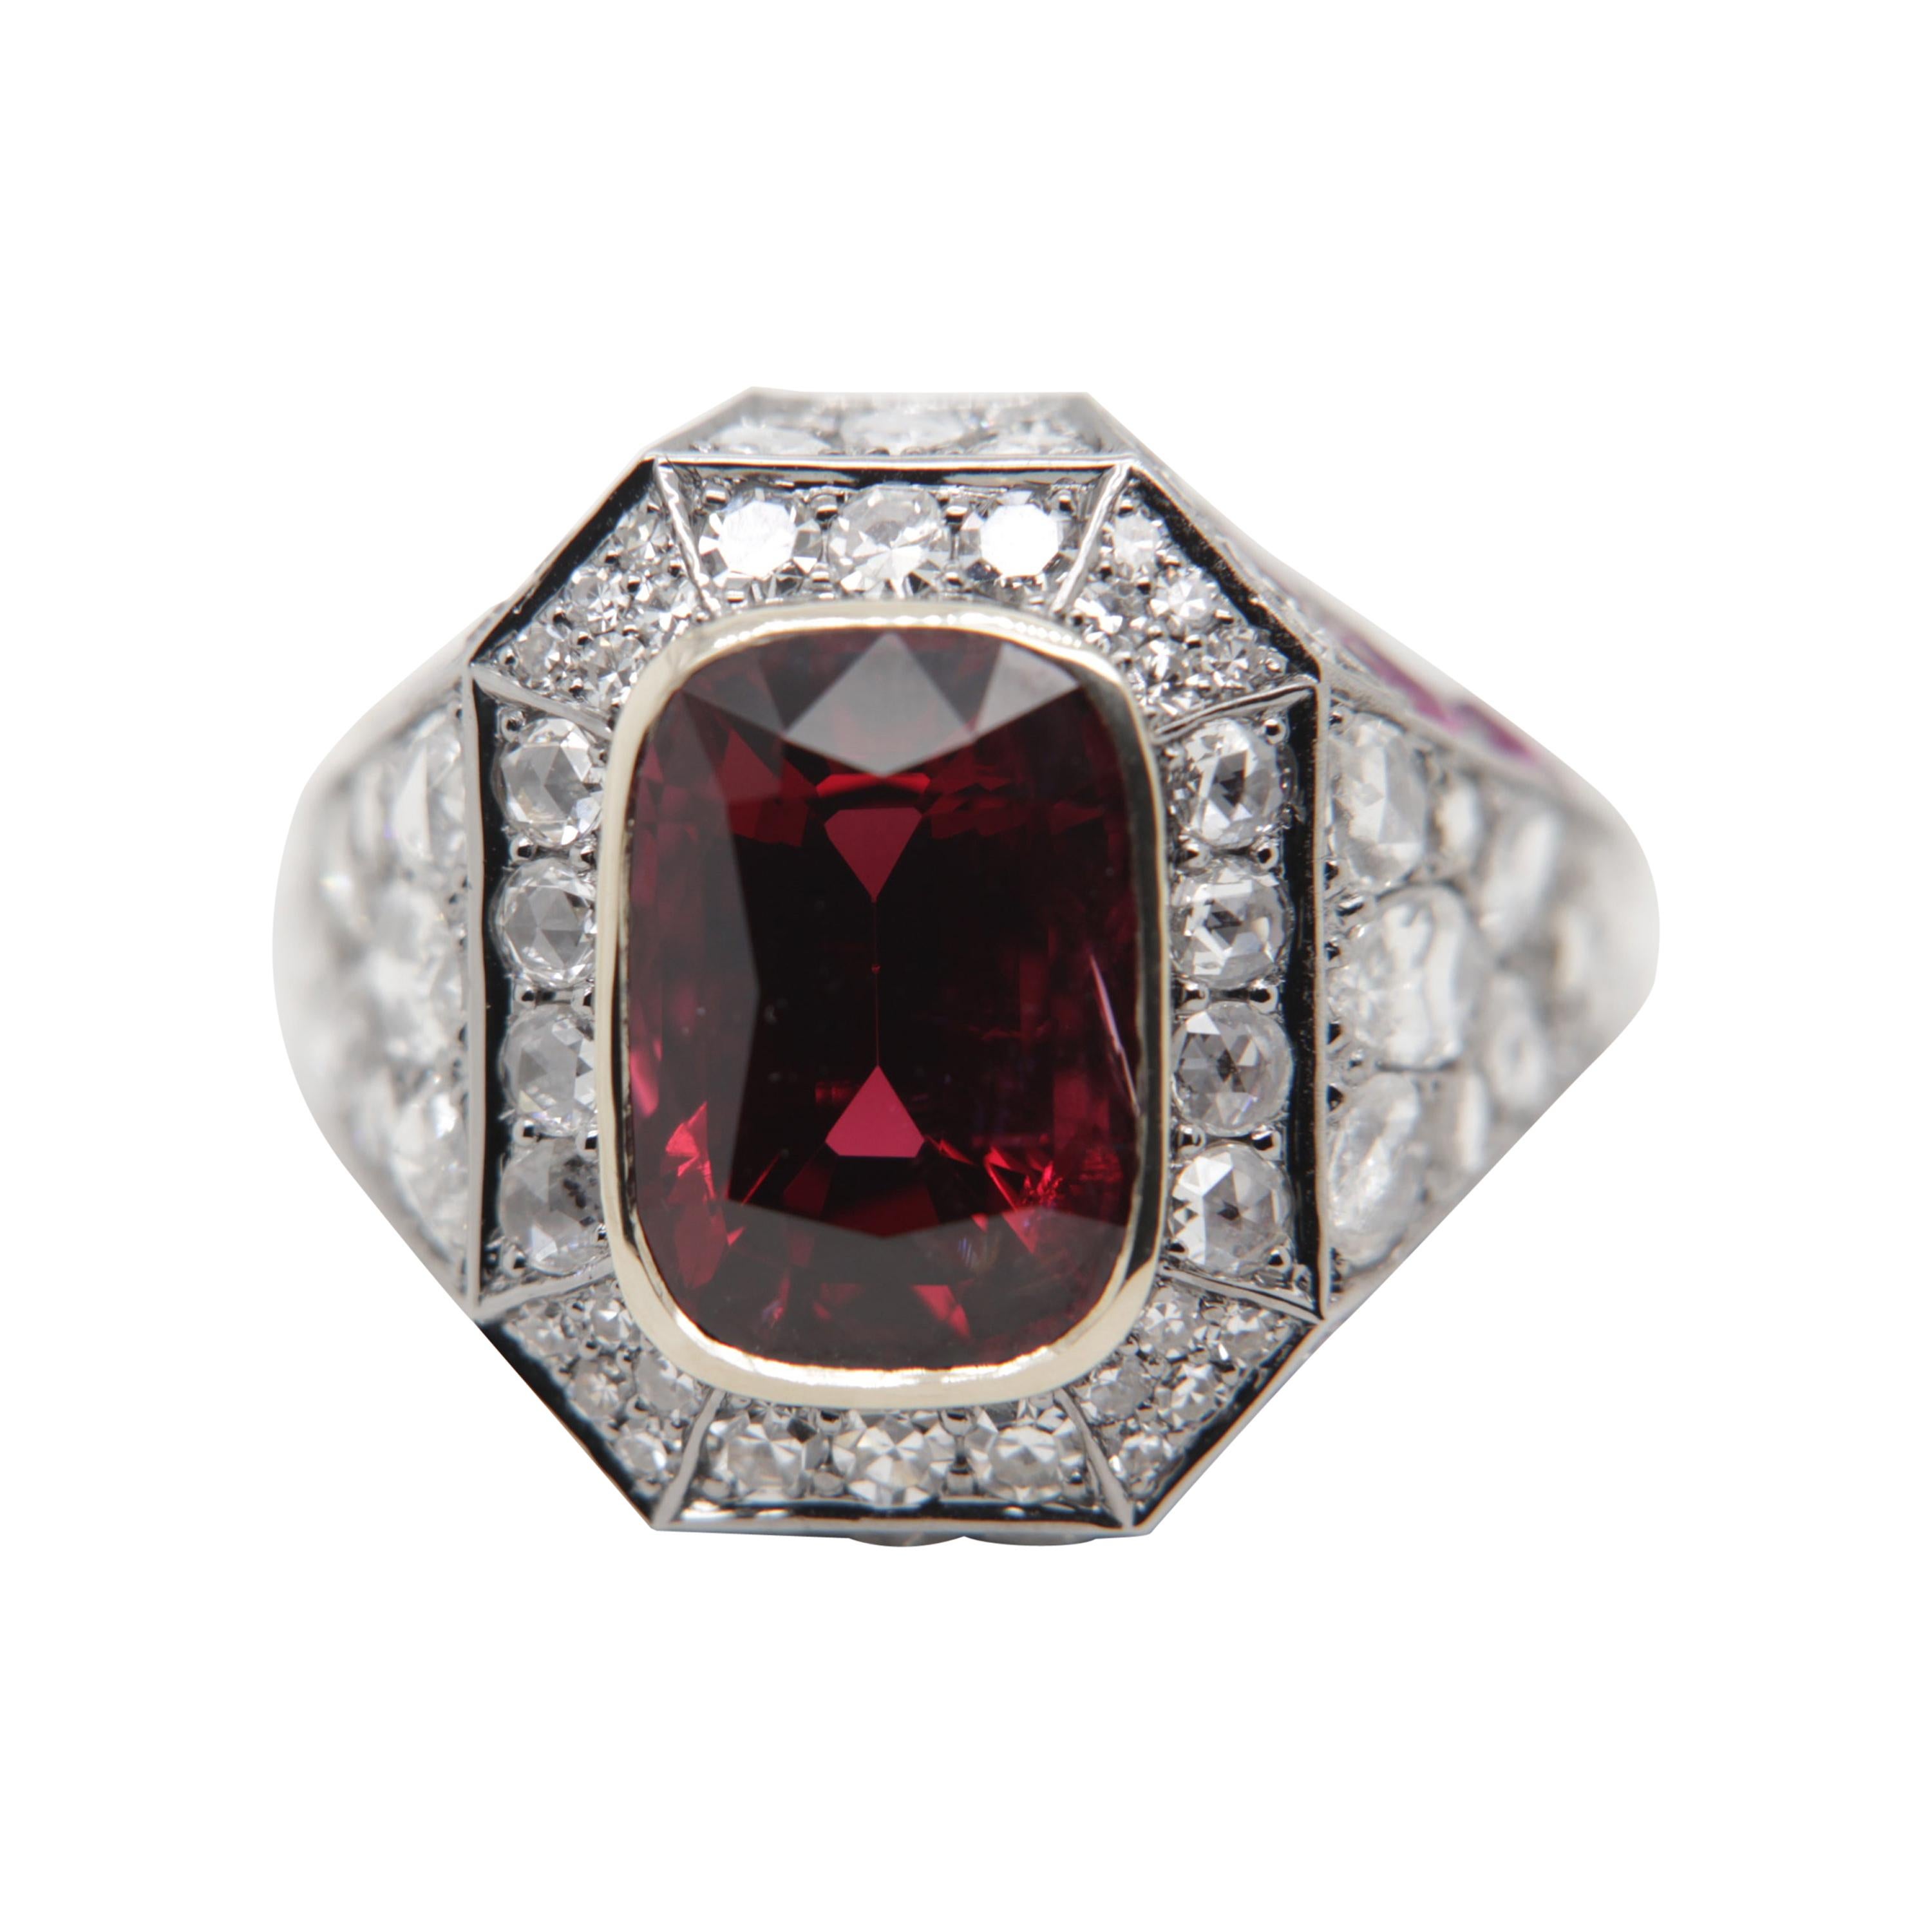 GRS 'Vivid Red' 5.28 Carat Burmese No Heat Spinal and Diamond Ring in 18k Gold